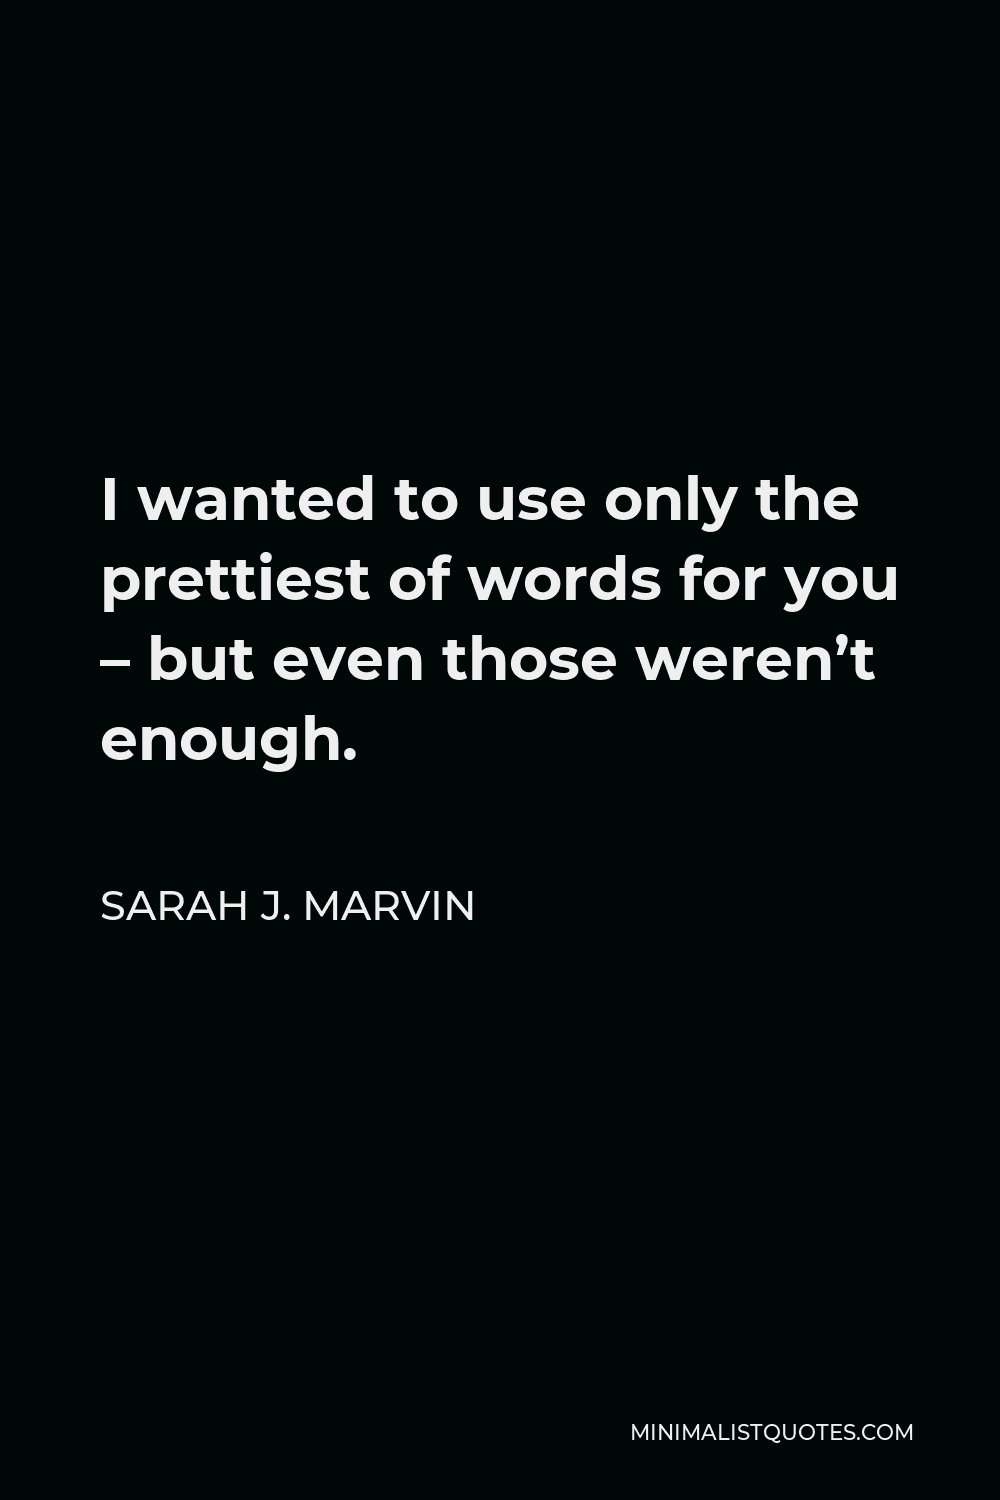 Sarah J. Marvin Quote - I wanted to use only the prettiest of words for you – but even those weren’t enough.